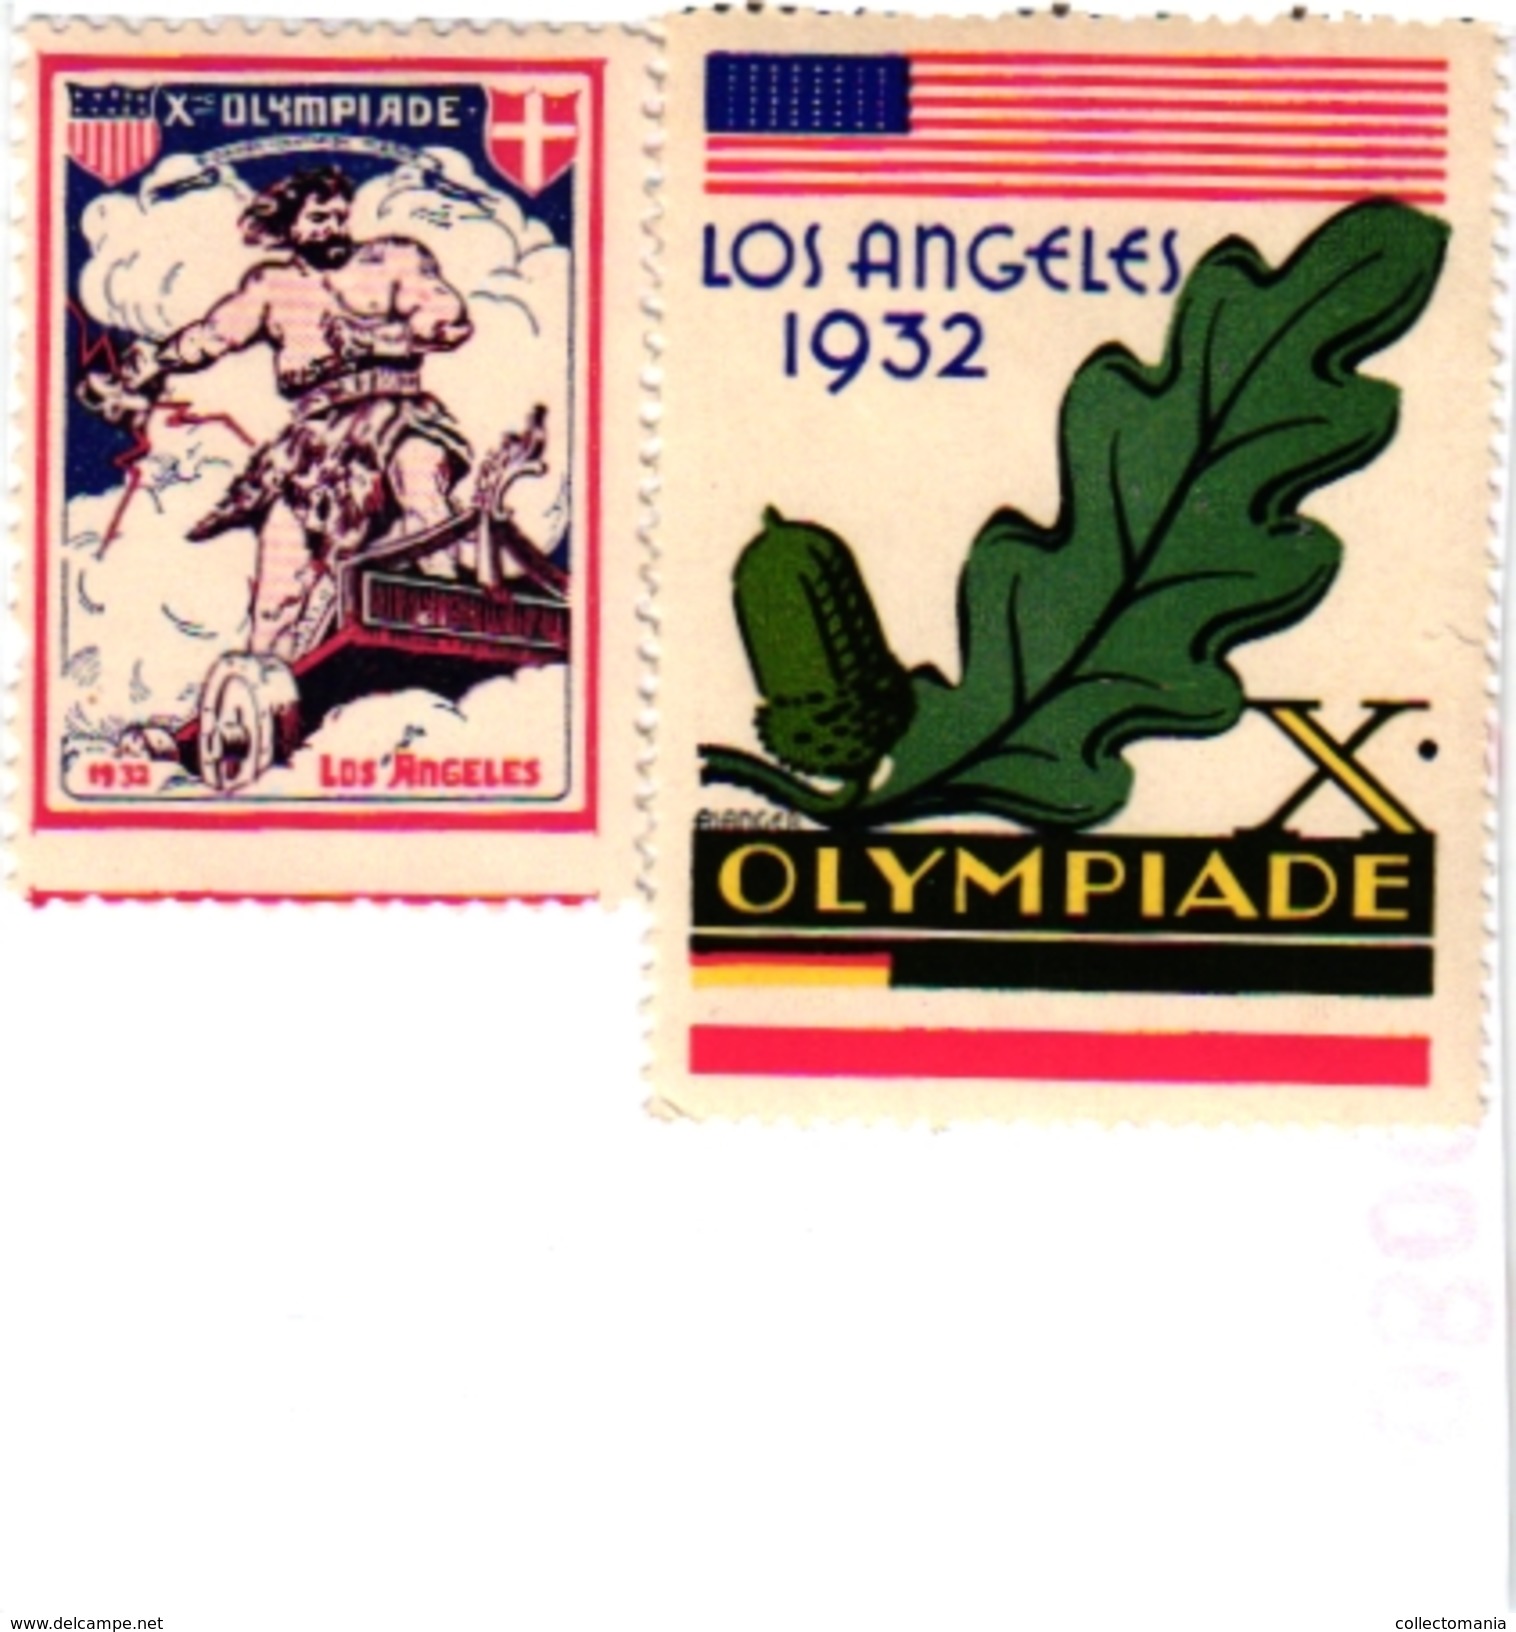 2 POSTER STAMPS Cinderella Olympiade LOS ANGELES 1932 - Sommer 1932: Los Angeles